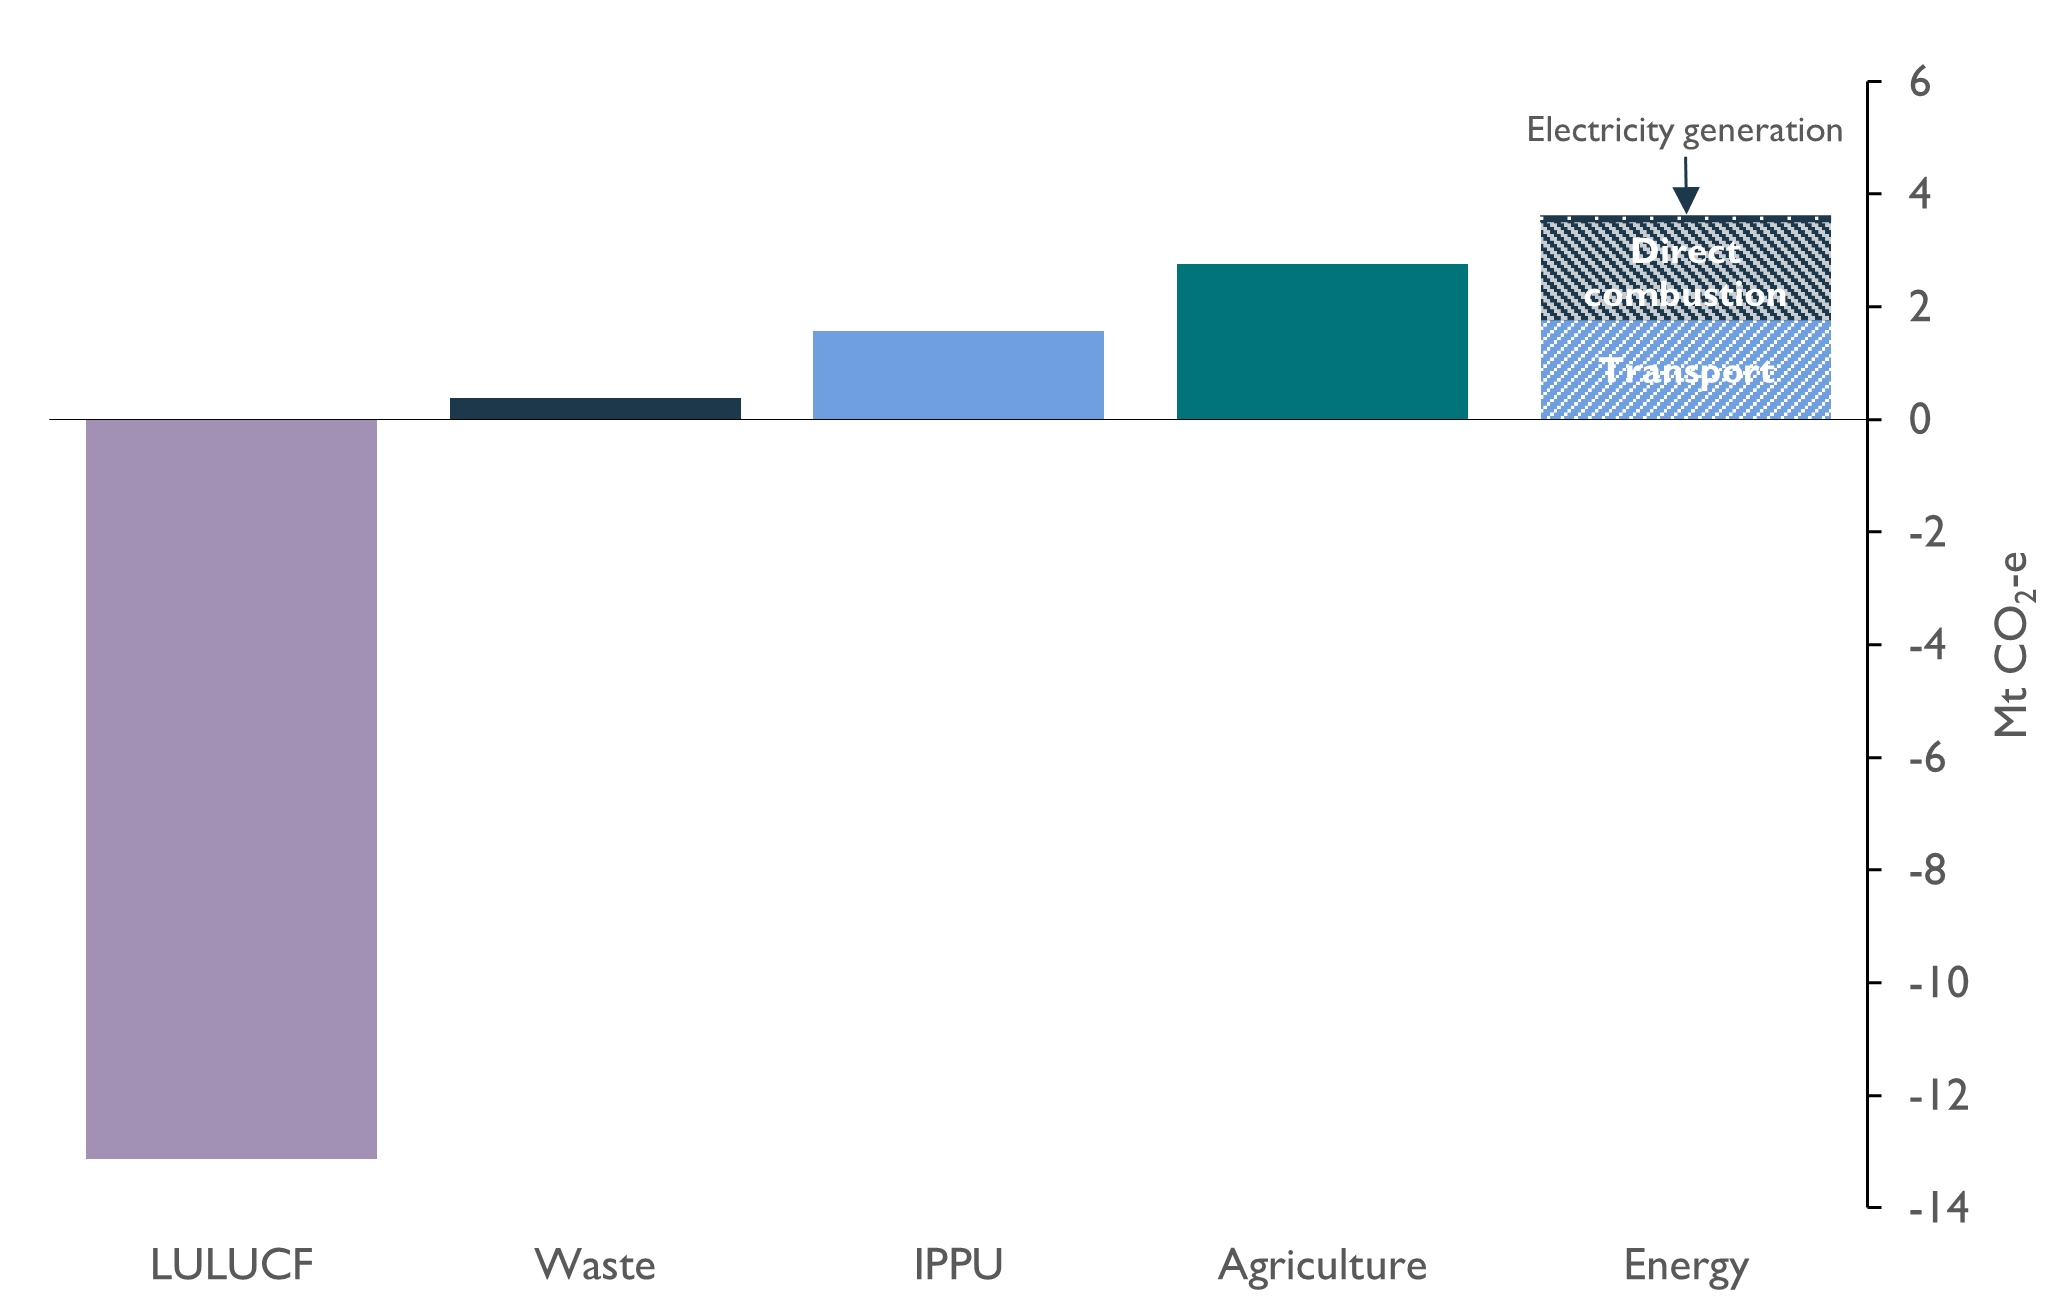 This figure combines a bar chart with a stacked bar chart to show the emissions and removals of different sectors and energy sub-sectors to Tasmania's net emissions for 2021 of minus 4.80 Mt CO2-e. Those contributions comprise the energy sector (3.63 Mt CO2-e total) which comprises the subsectors of direct combustion (1.74 Mt CO2-e), transport (1.75 Mt CO2-e) and electricity generation (0.13 Mt CO2-e). The other sectoral contributions are from agriculture (2.76 Mt CO2-e), IPPU (1.56 Mt CO2-e), Waste (0.38 Mt CO2-e) and LULUCF (-13.13 Mt CO2-e). The bar chart highlights the significant impact of the LULUCF sector in offsetting Tasmania's net emissions.